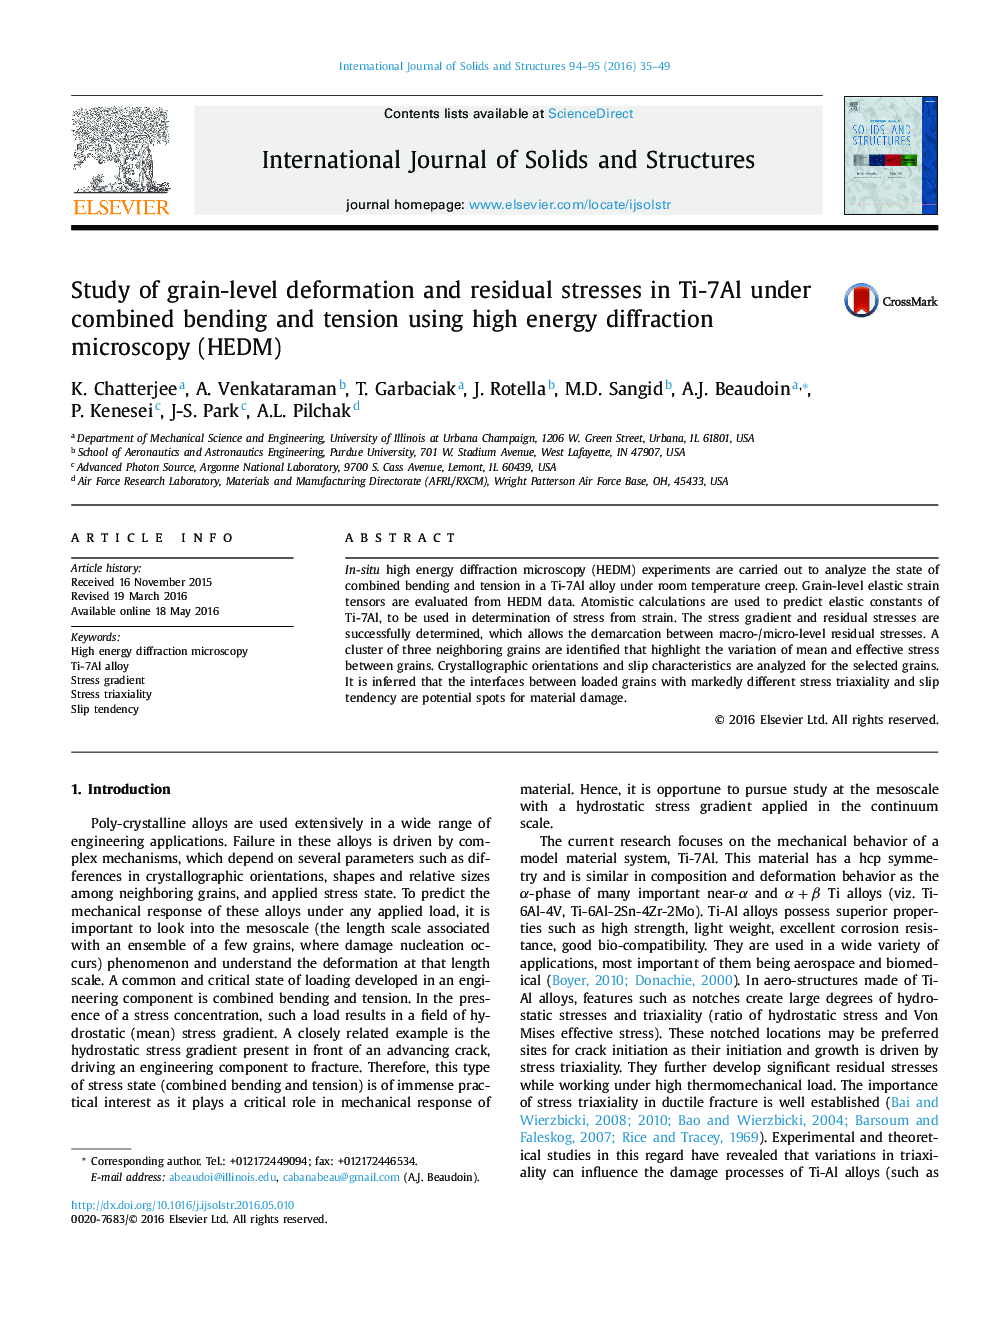 Study of grain-level deformation and residual stresses in Ti-7Al under combined bending and tension using high energy diffraction microscopy (HEDM)